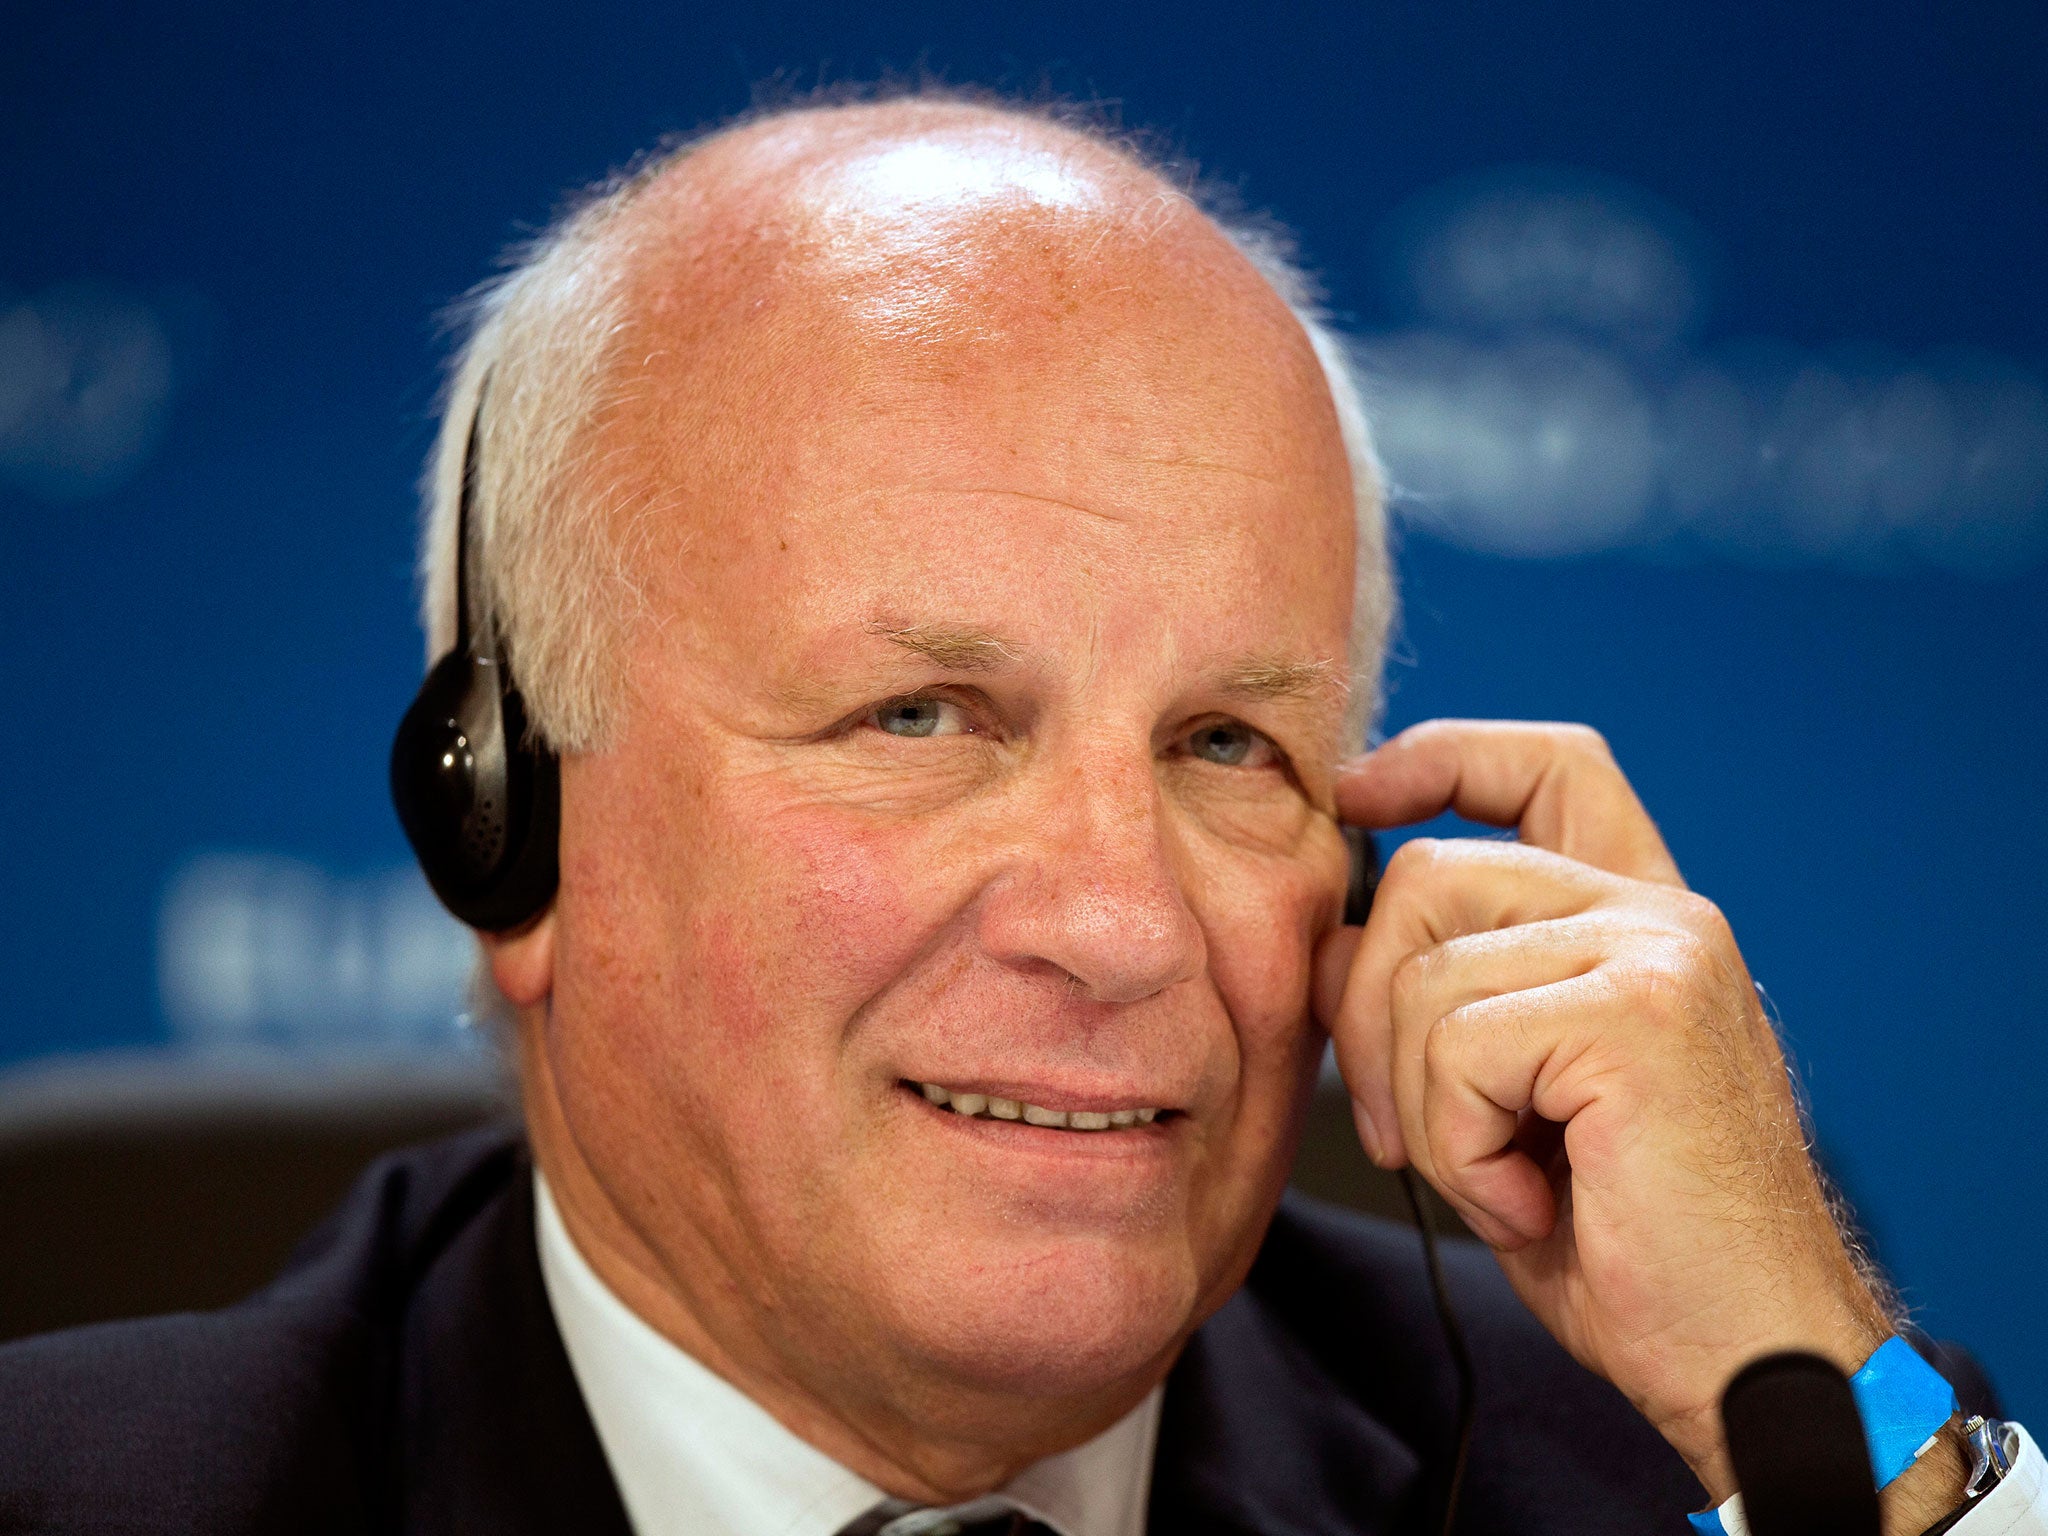 Greg Dyke insists he will not resign as Football Association chairman after receiving a watch worth more than £16,000 but has called for an end to the culture of gifts being given to football officials